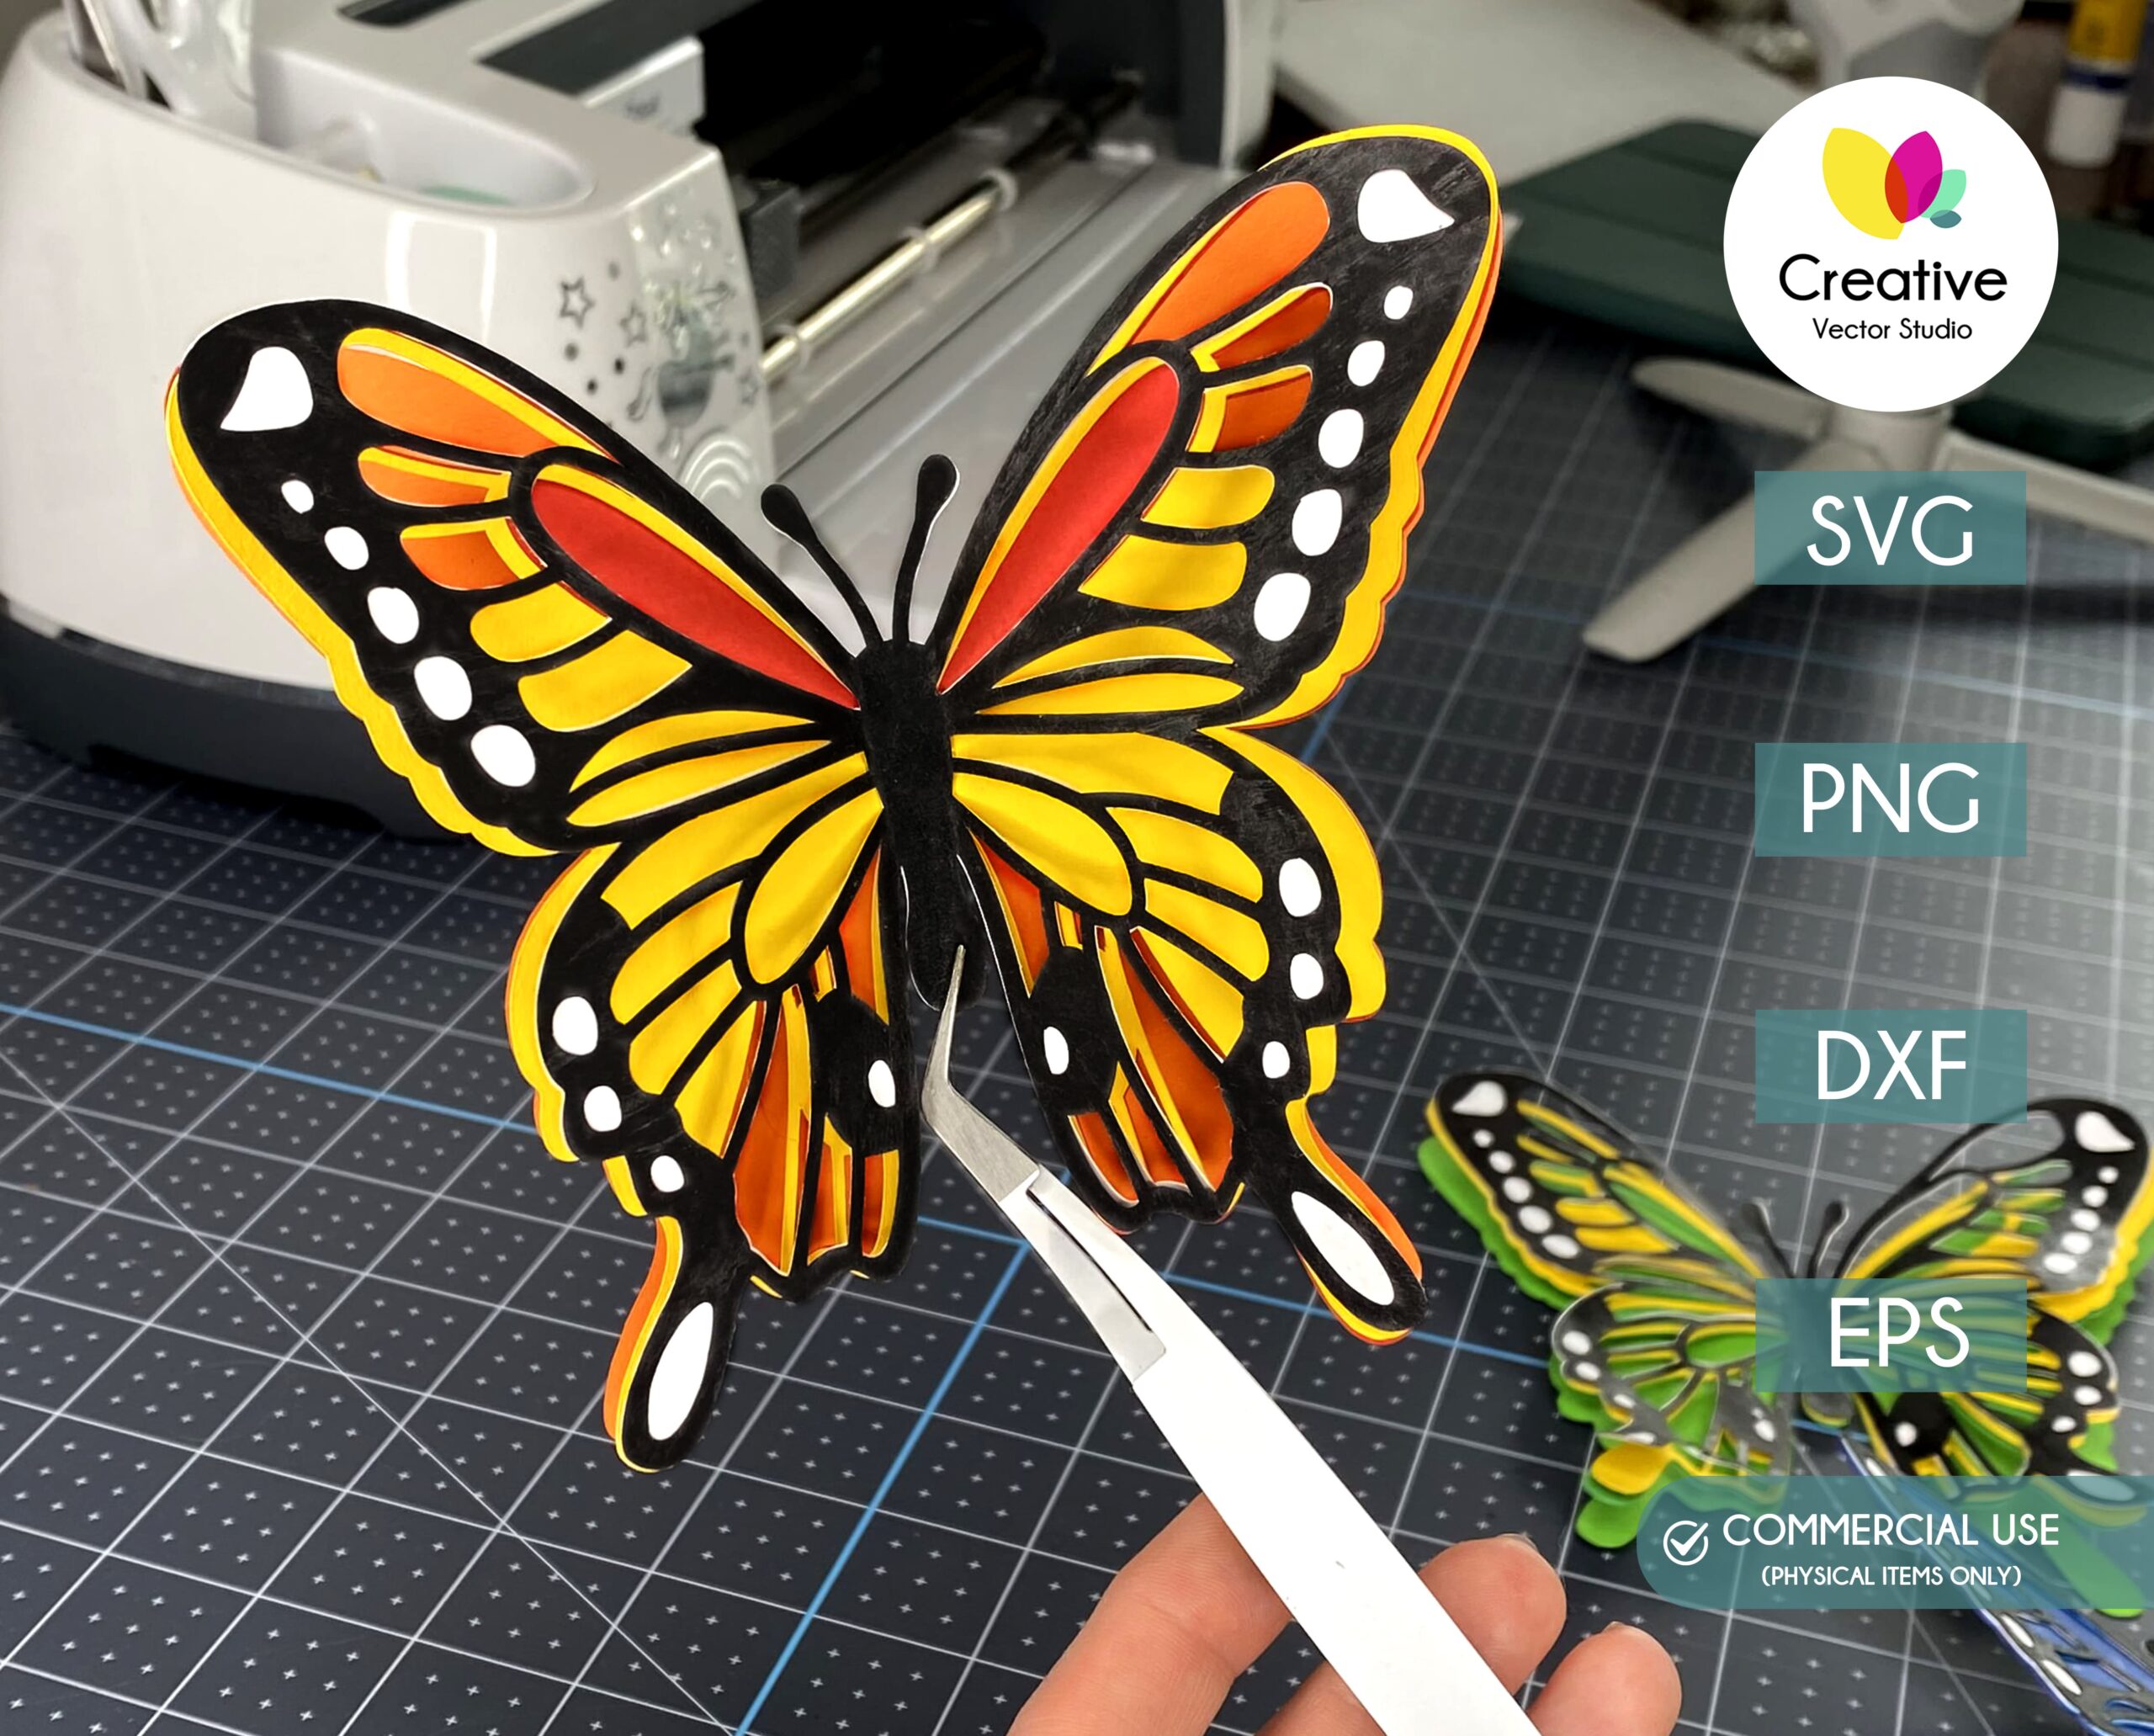 3D Butterfly SVG, PNG, DXF, EPS - Creative Vector Studio